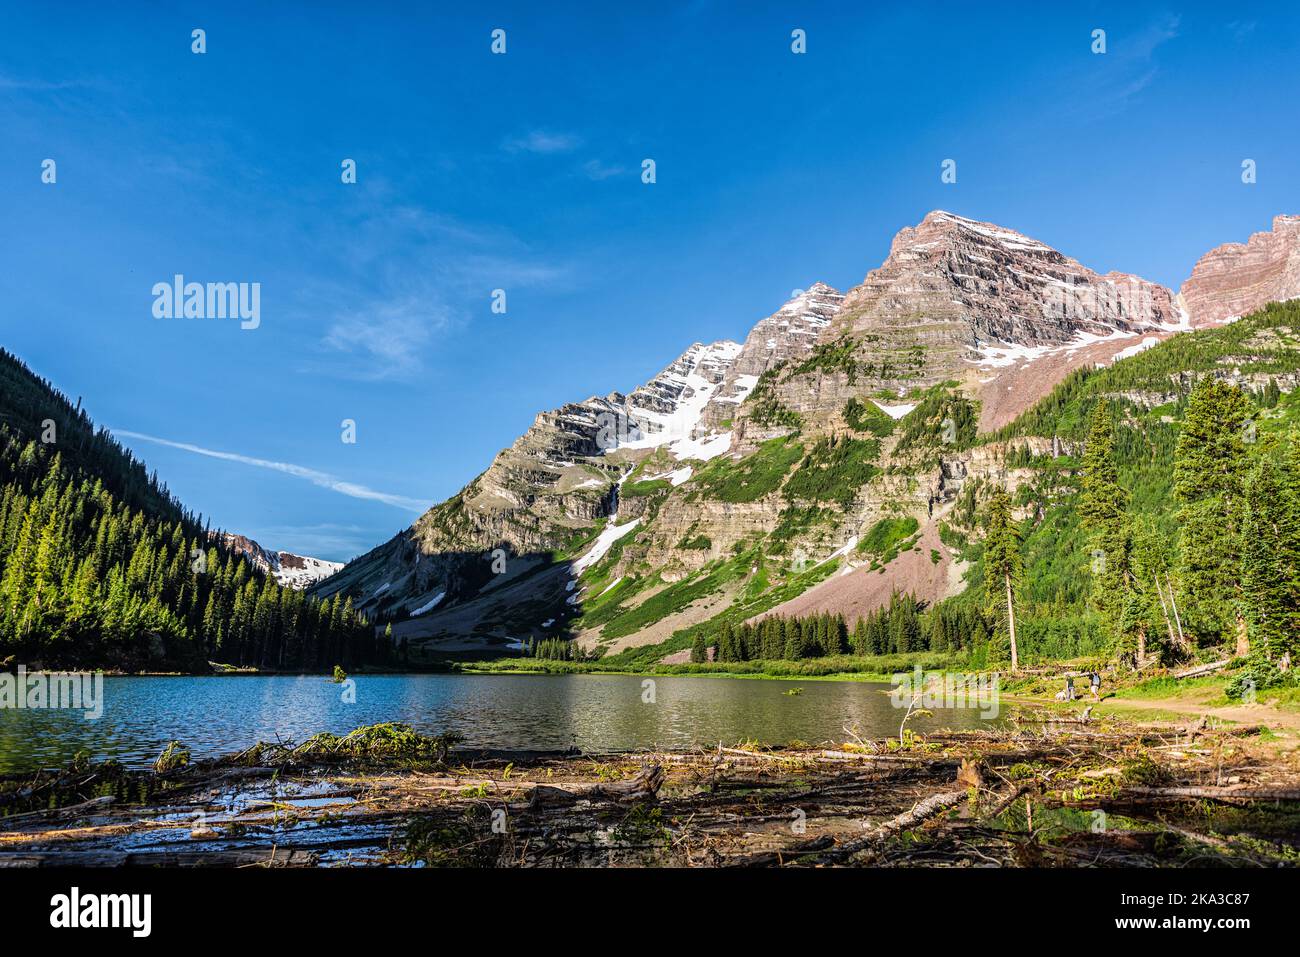 Aspen, Colorado Maroon Bells area with Crater lake water and rocky mountain peak in summer on trail wide angle view with avalanche debris logs Stock Photo